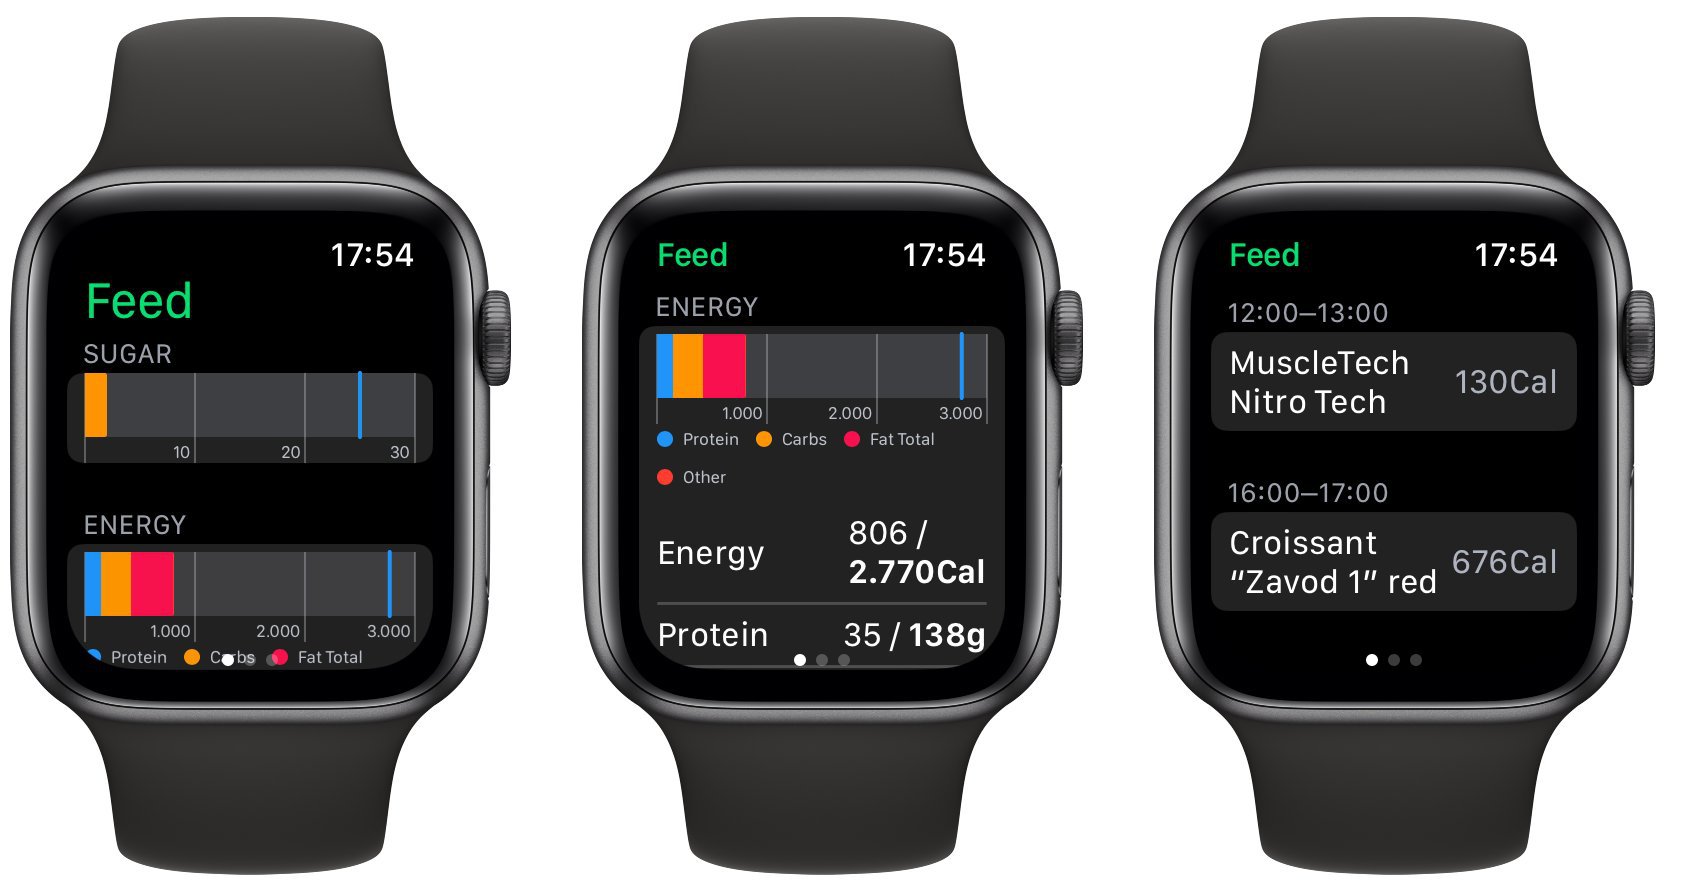 Sugar, Calorie Tracker SugarBot Arrives on the Apple Watch